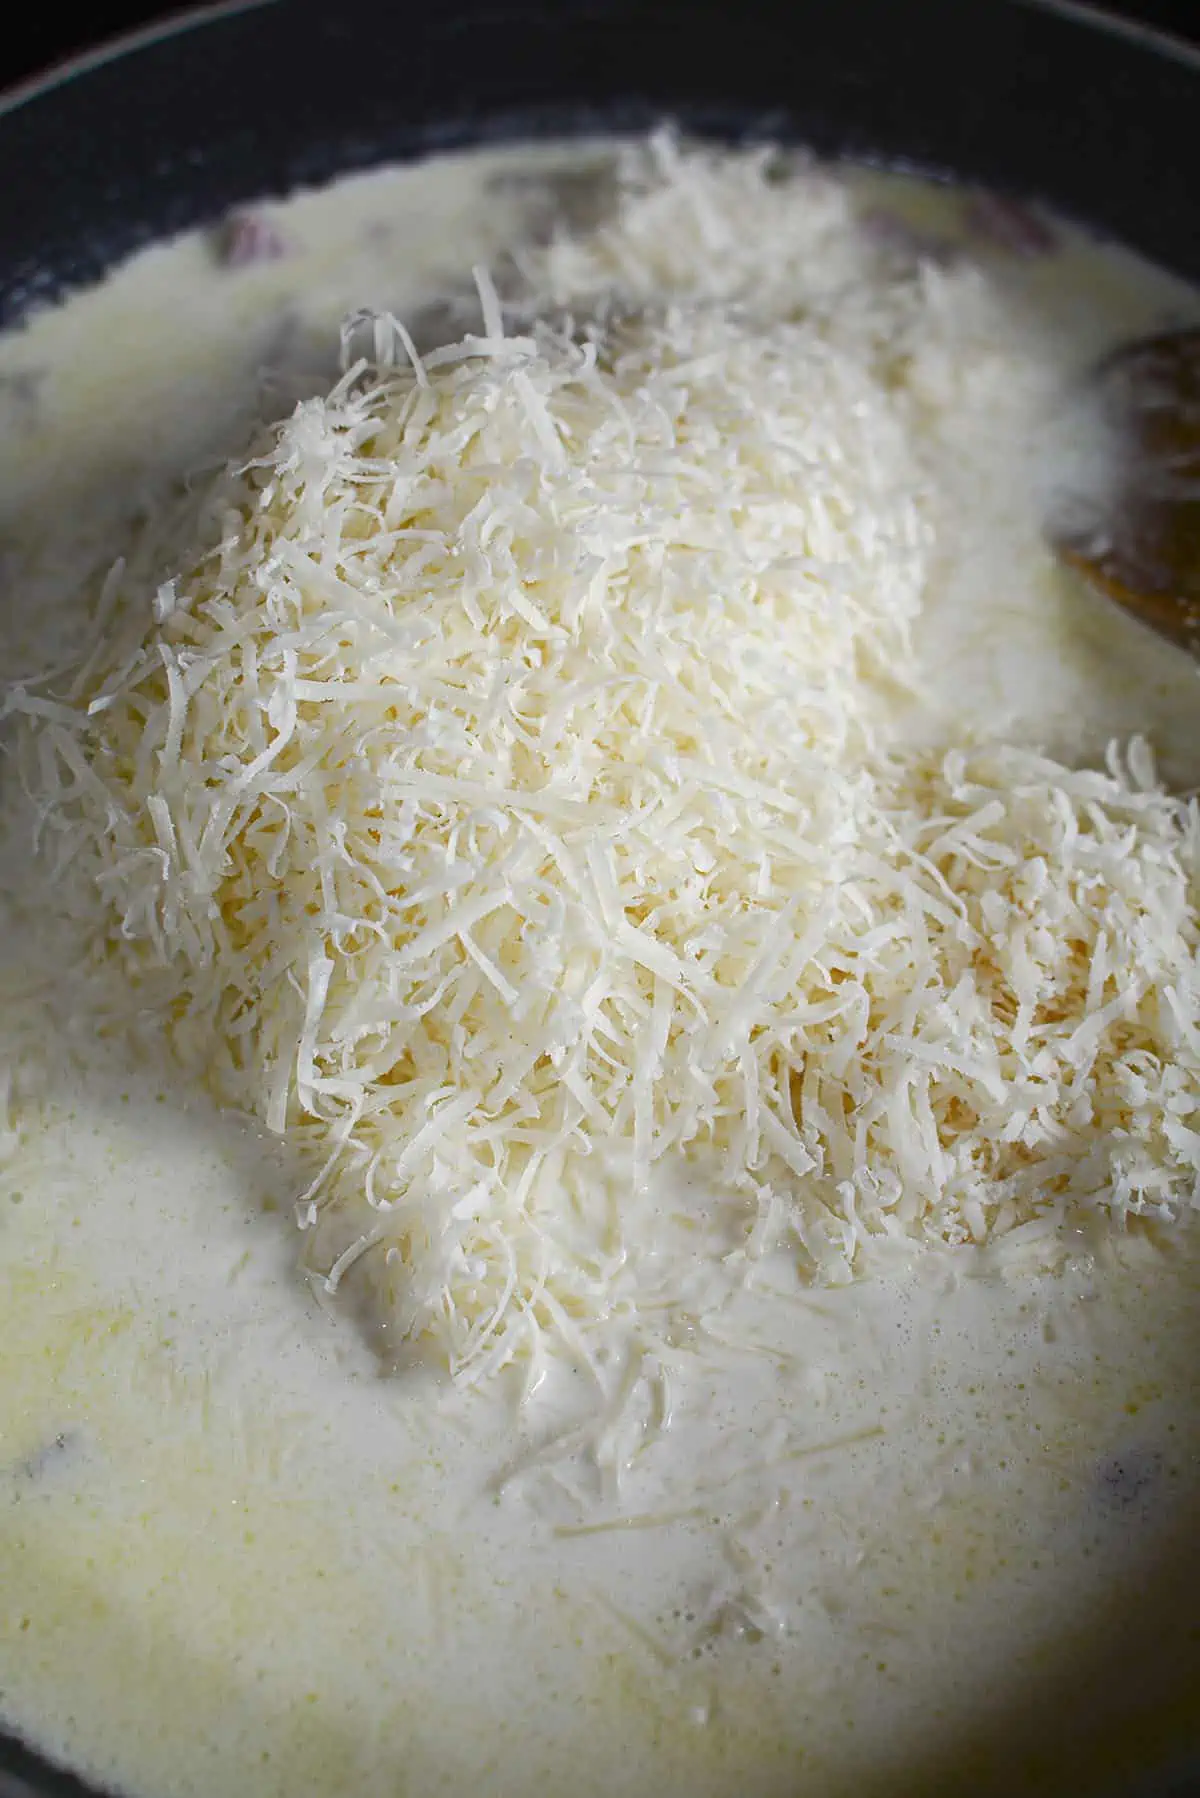 Grated parmesan cheese is melting into the cream sauce for the pasta dish.